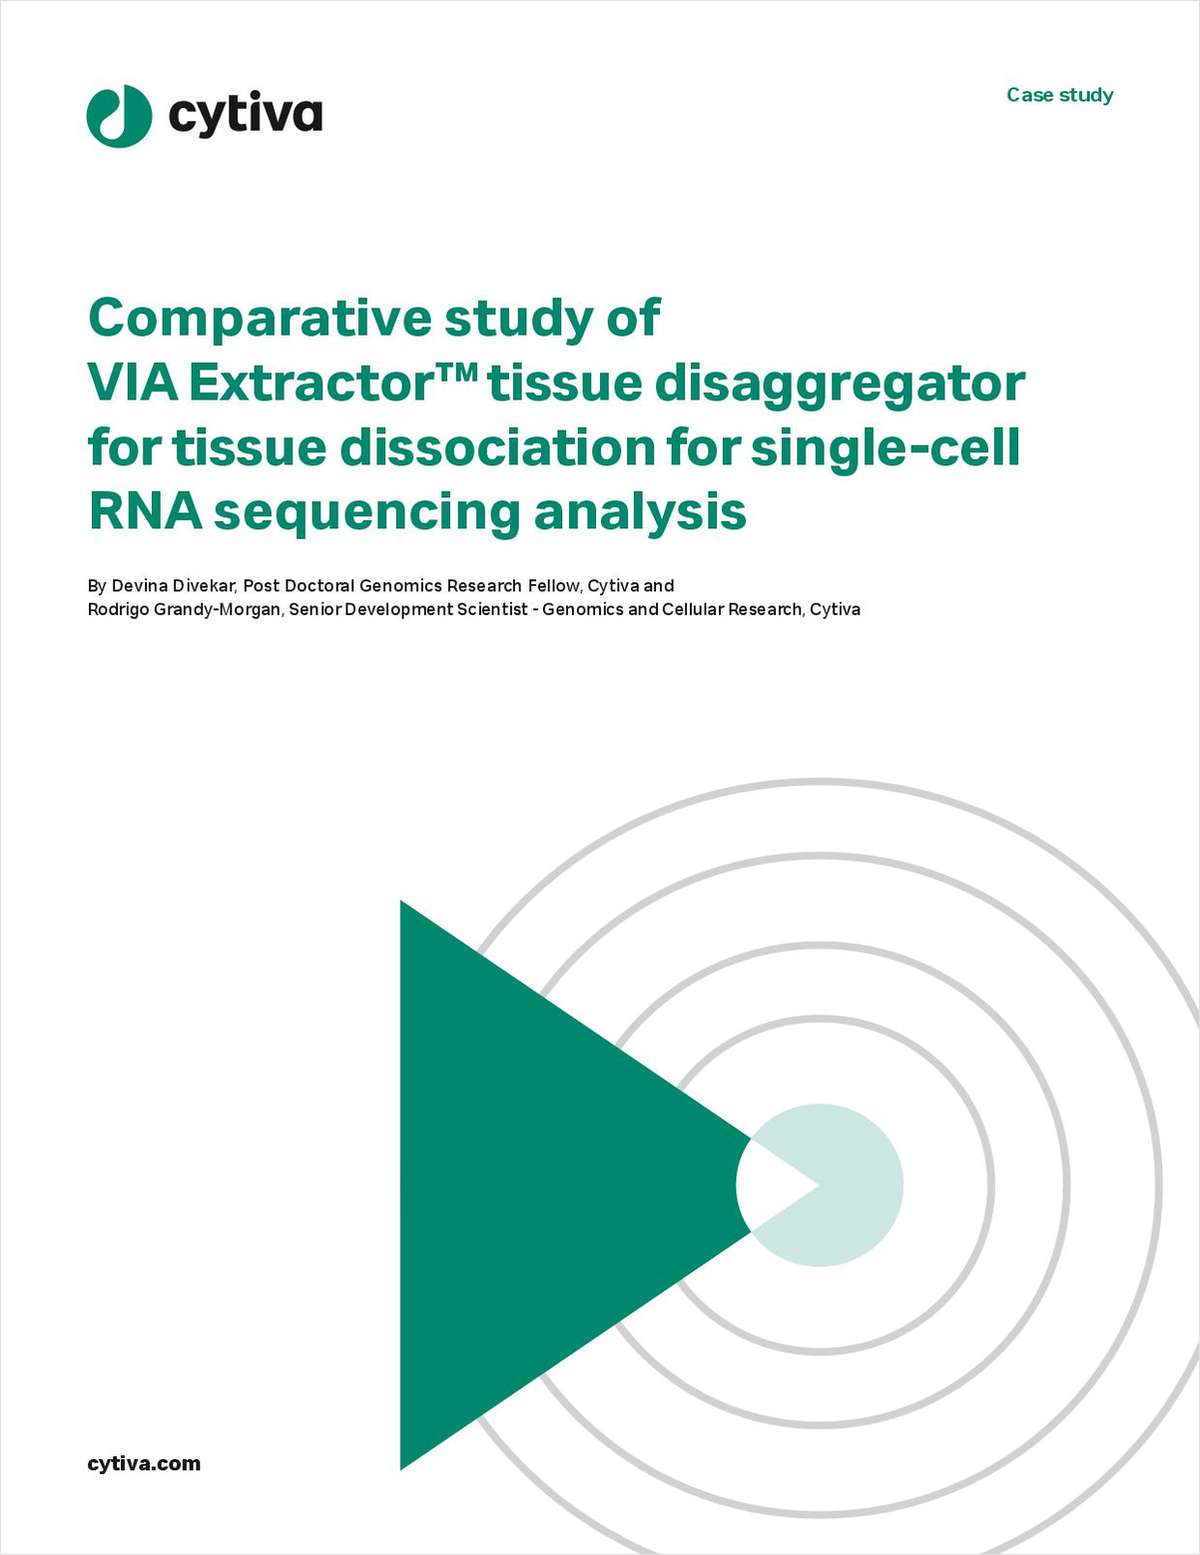 Comparative Study of Via Extractor Tissue Disaggregator for Tissue Dissociation for Single-Cell RNA Sequencing Analysis